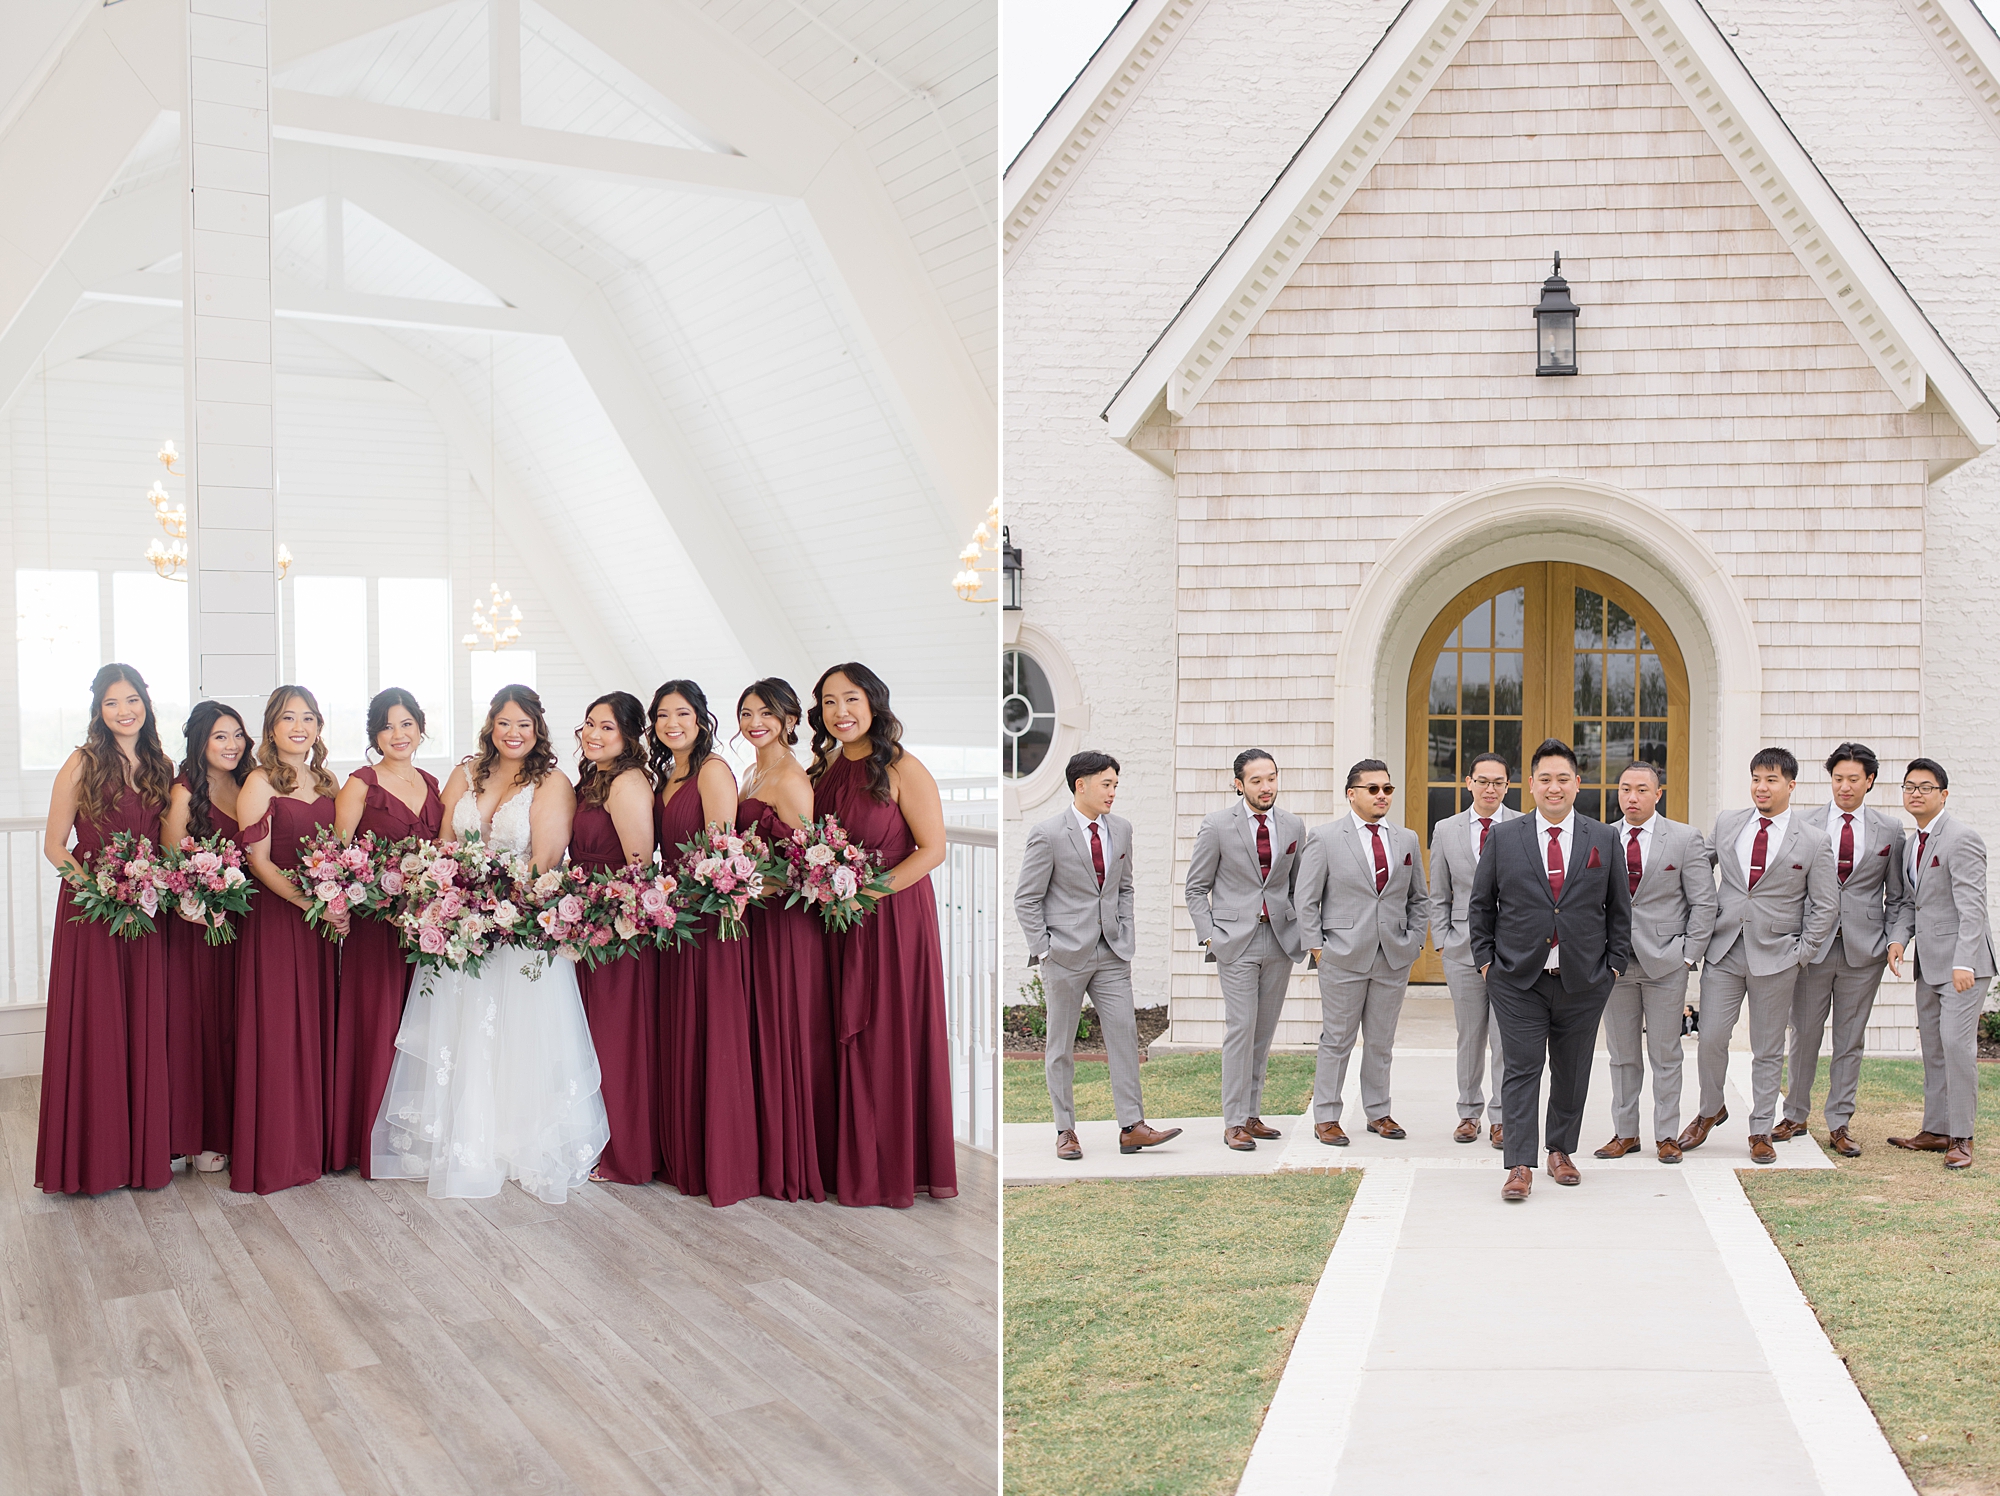 newlyweds pose with bridesmaids in burgundy gowns and groomsmen in grey suits 